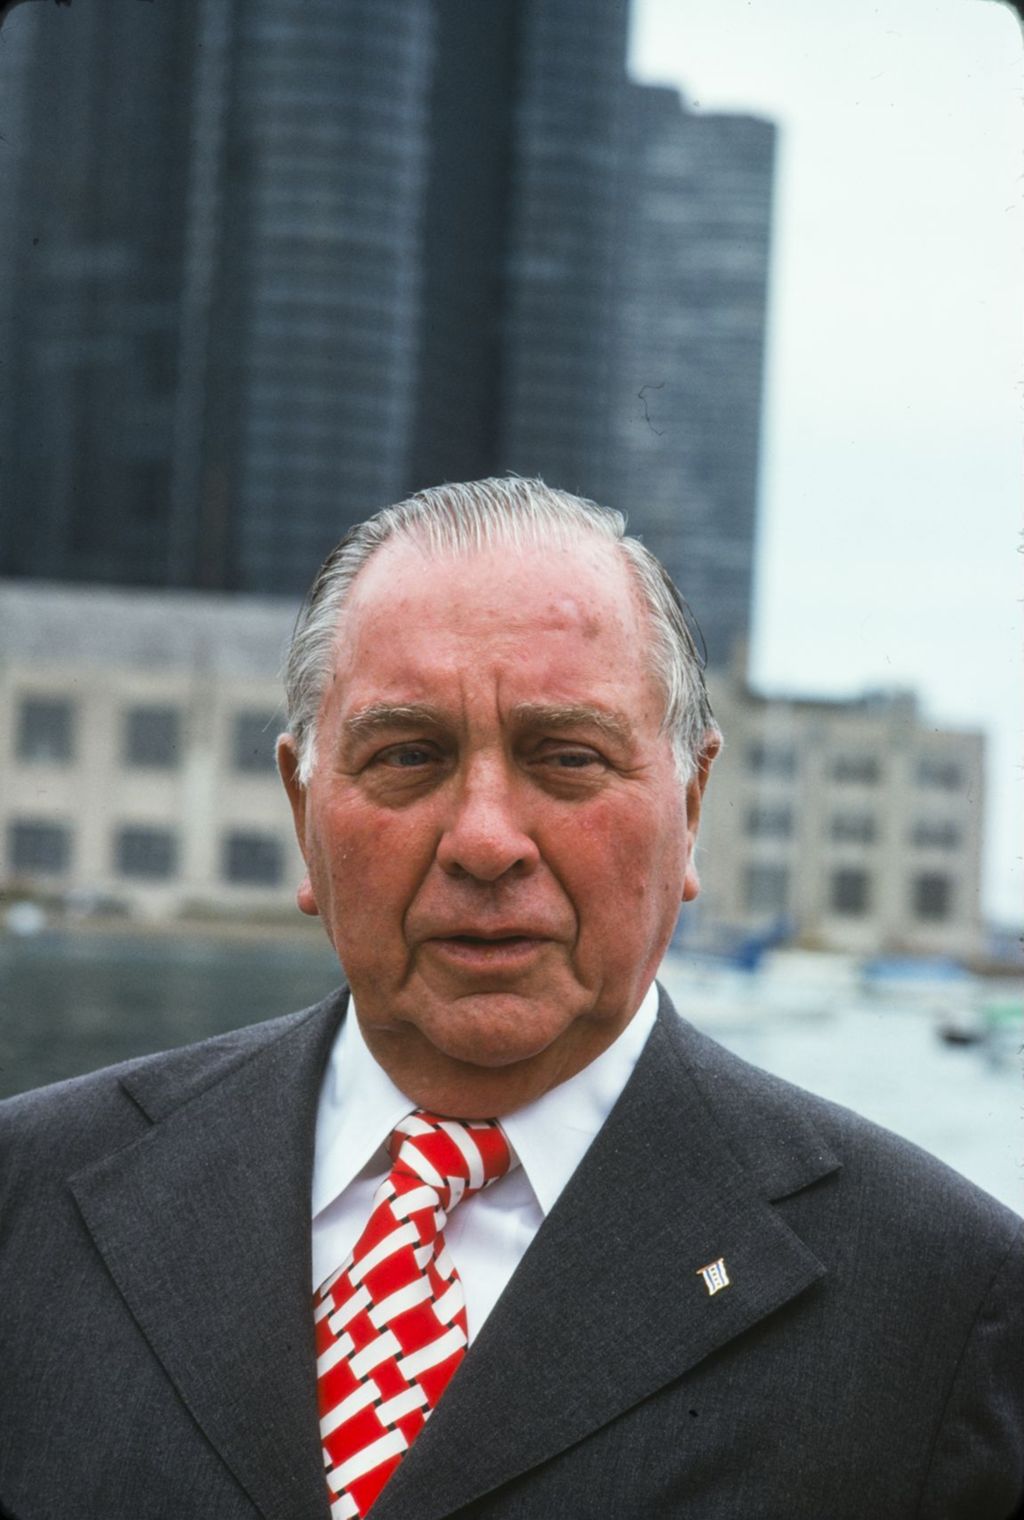 Miniature of Portraits of Richard J. Daley with buildings behind him